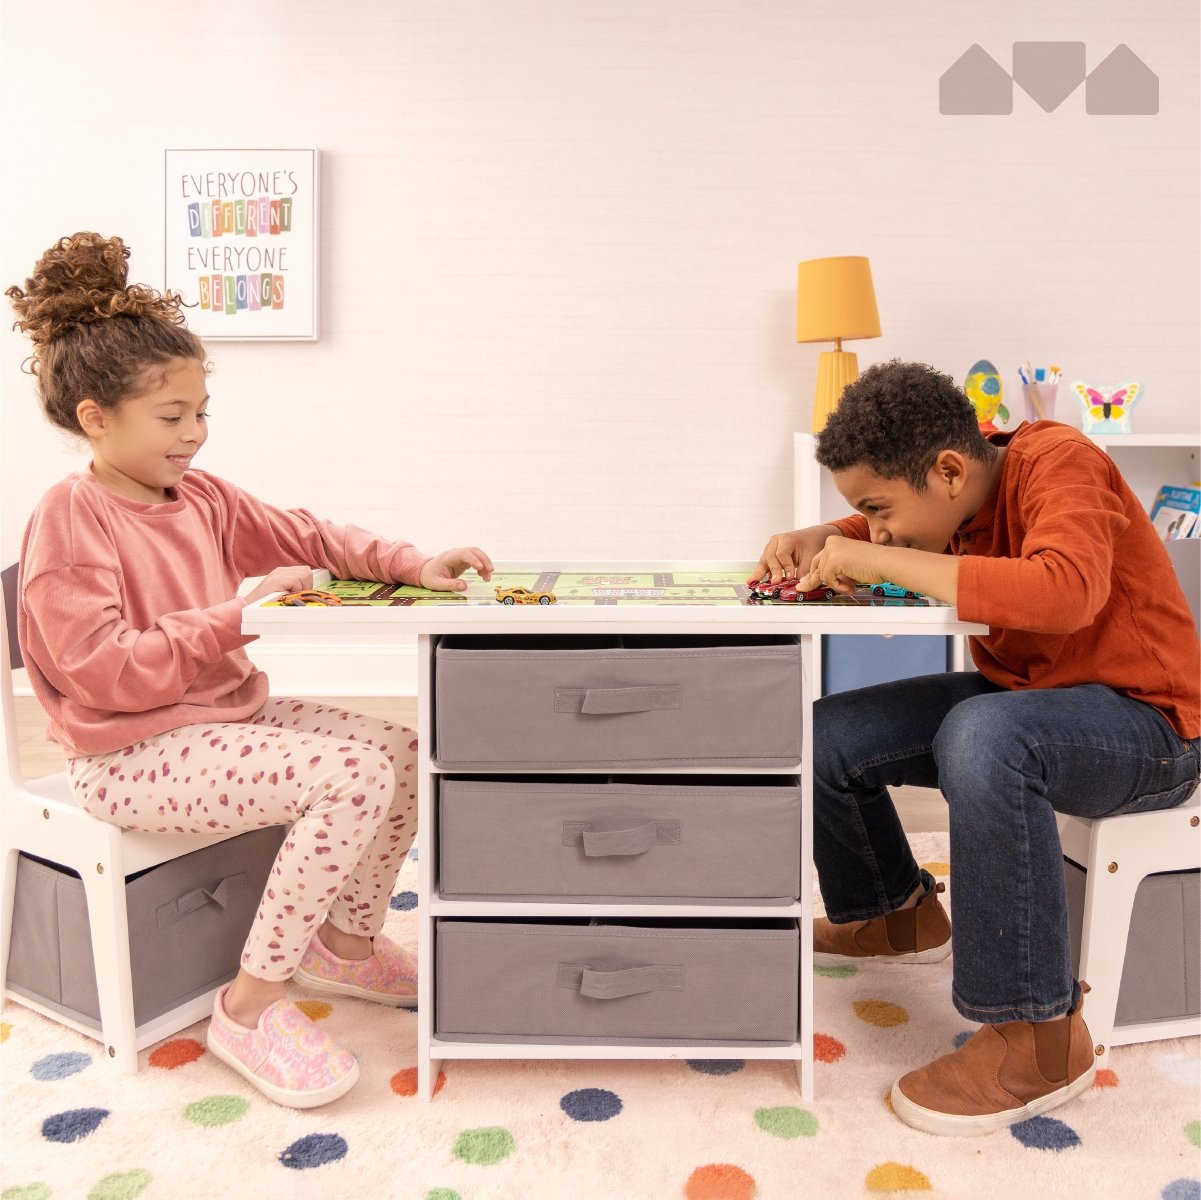 Table Storage Table Play 3-in-1 Bedding with | Milliard Kids Play